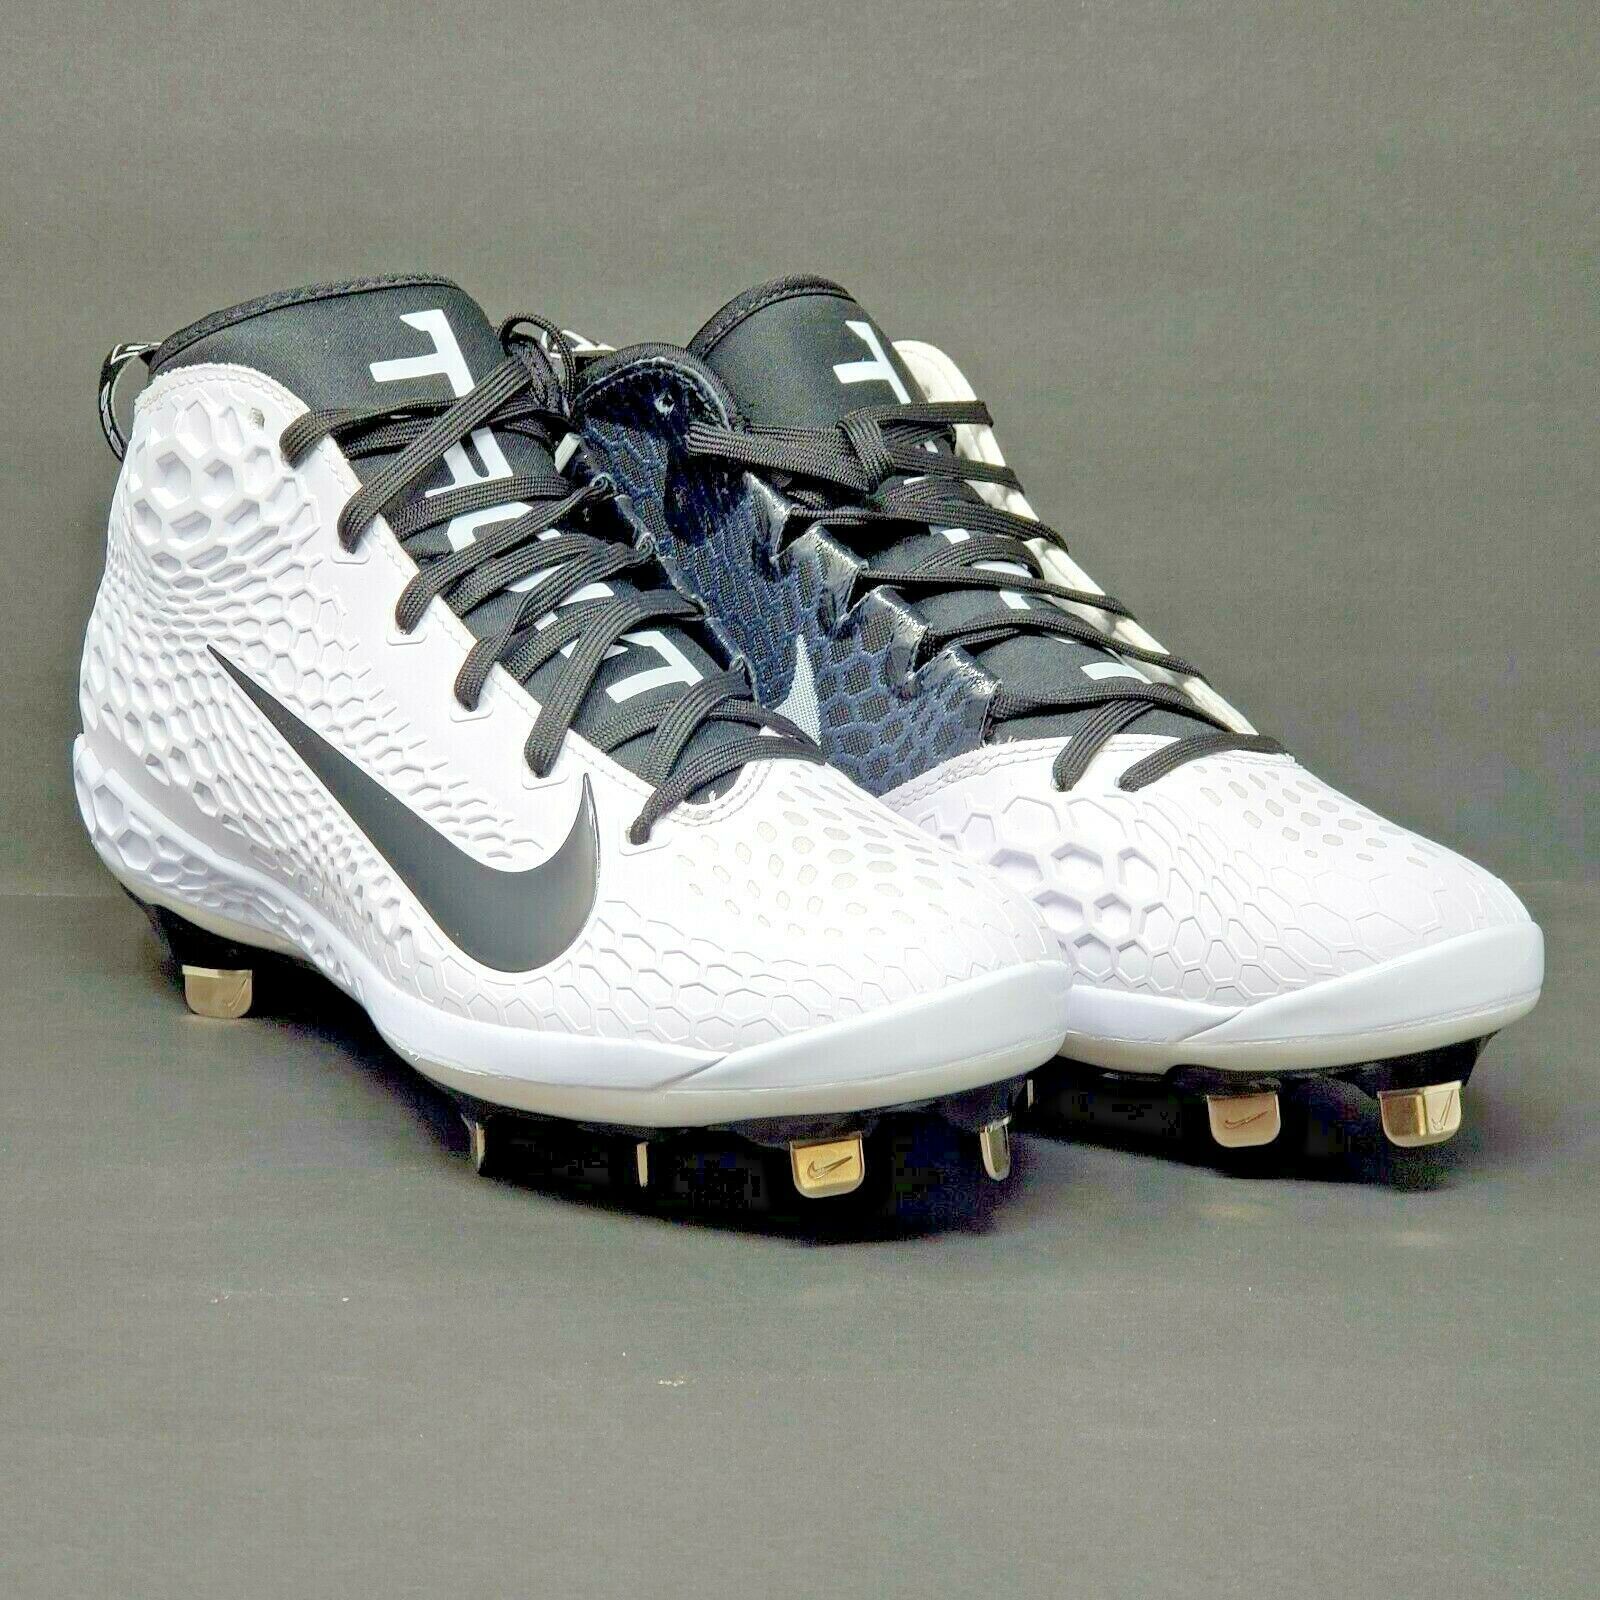 trout 5 metal cleats